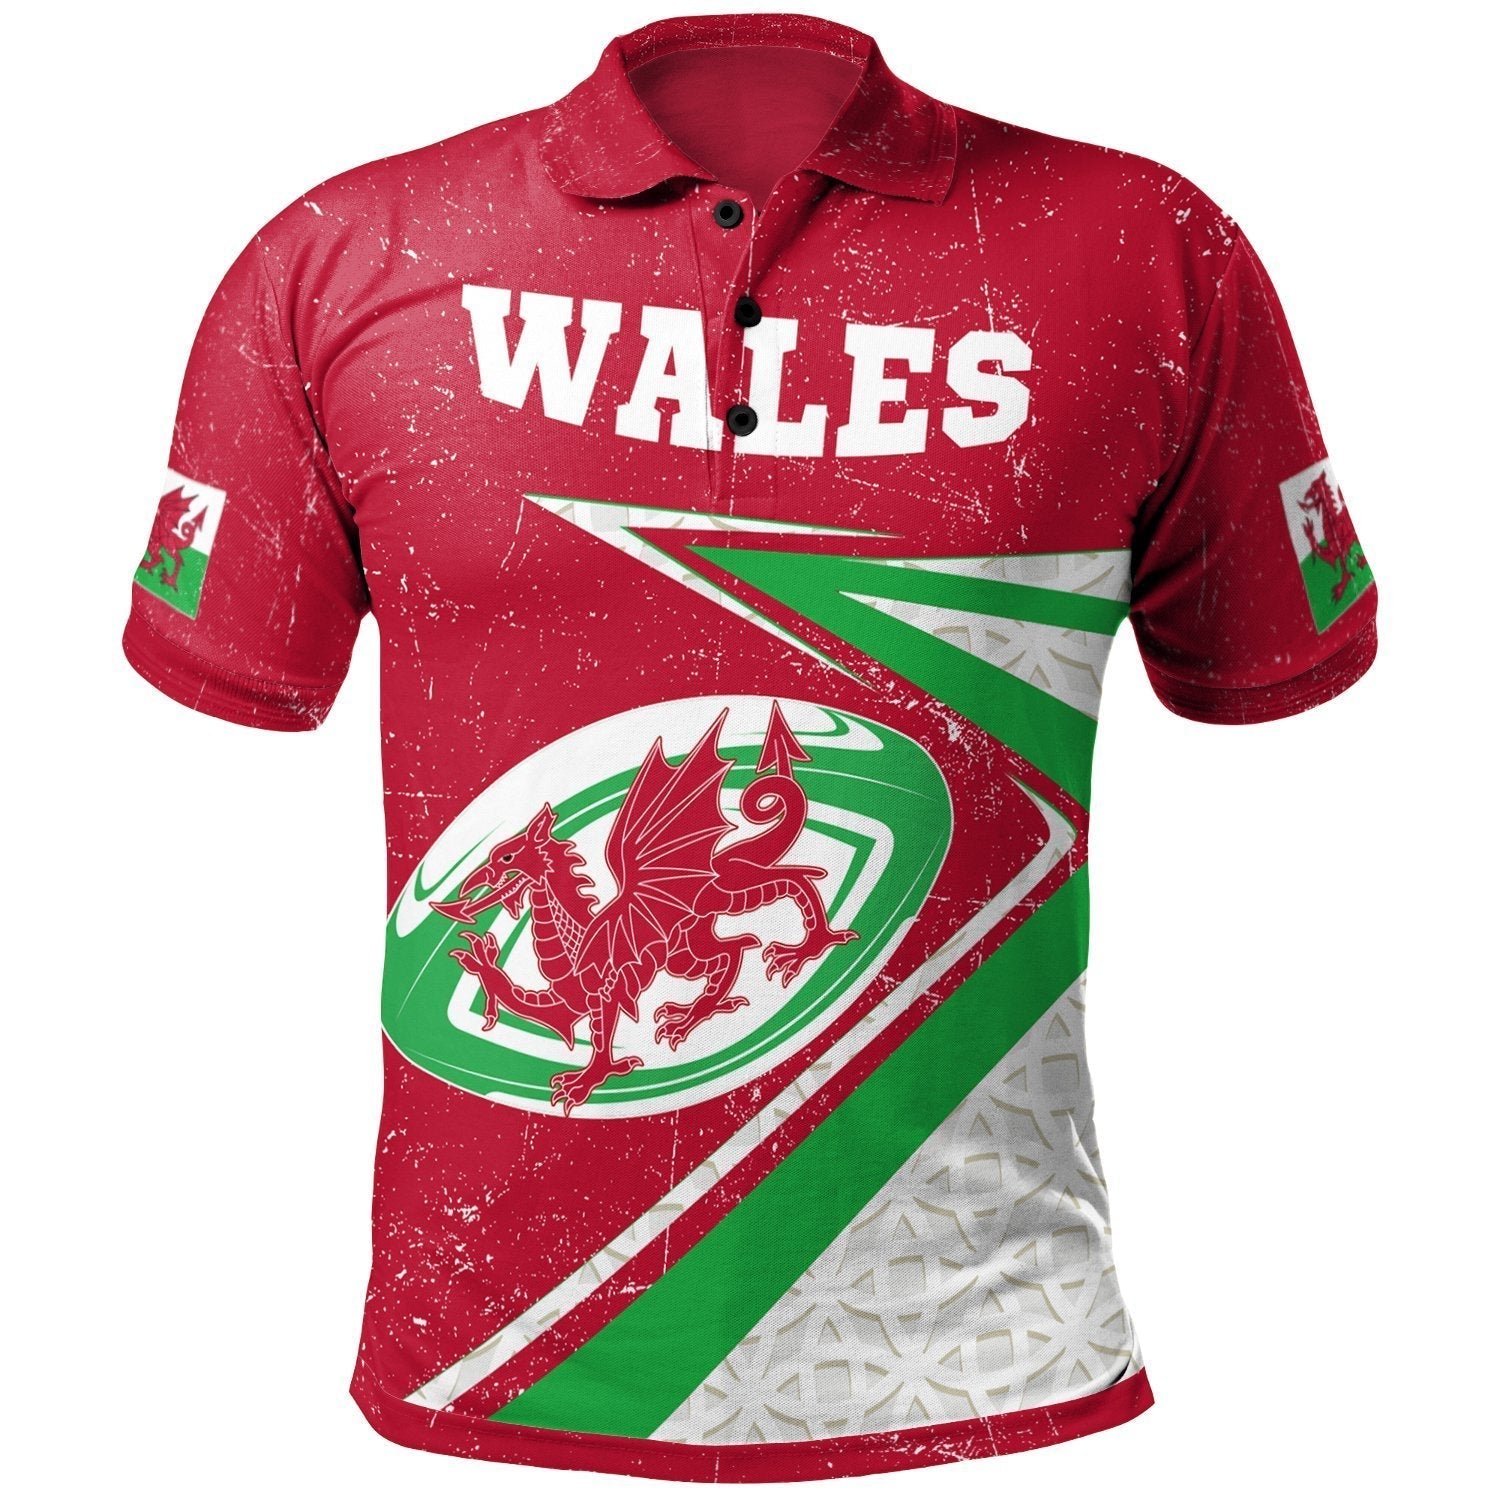 wales-rugby-polo-shirt-celtic-welsh-rugby-ball